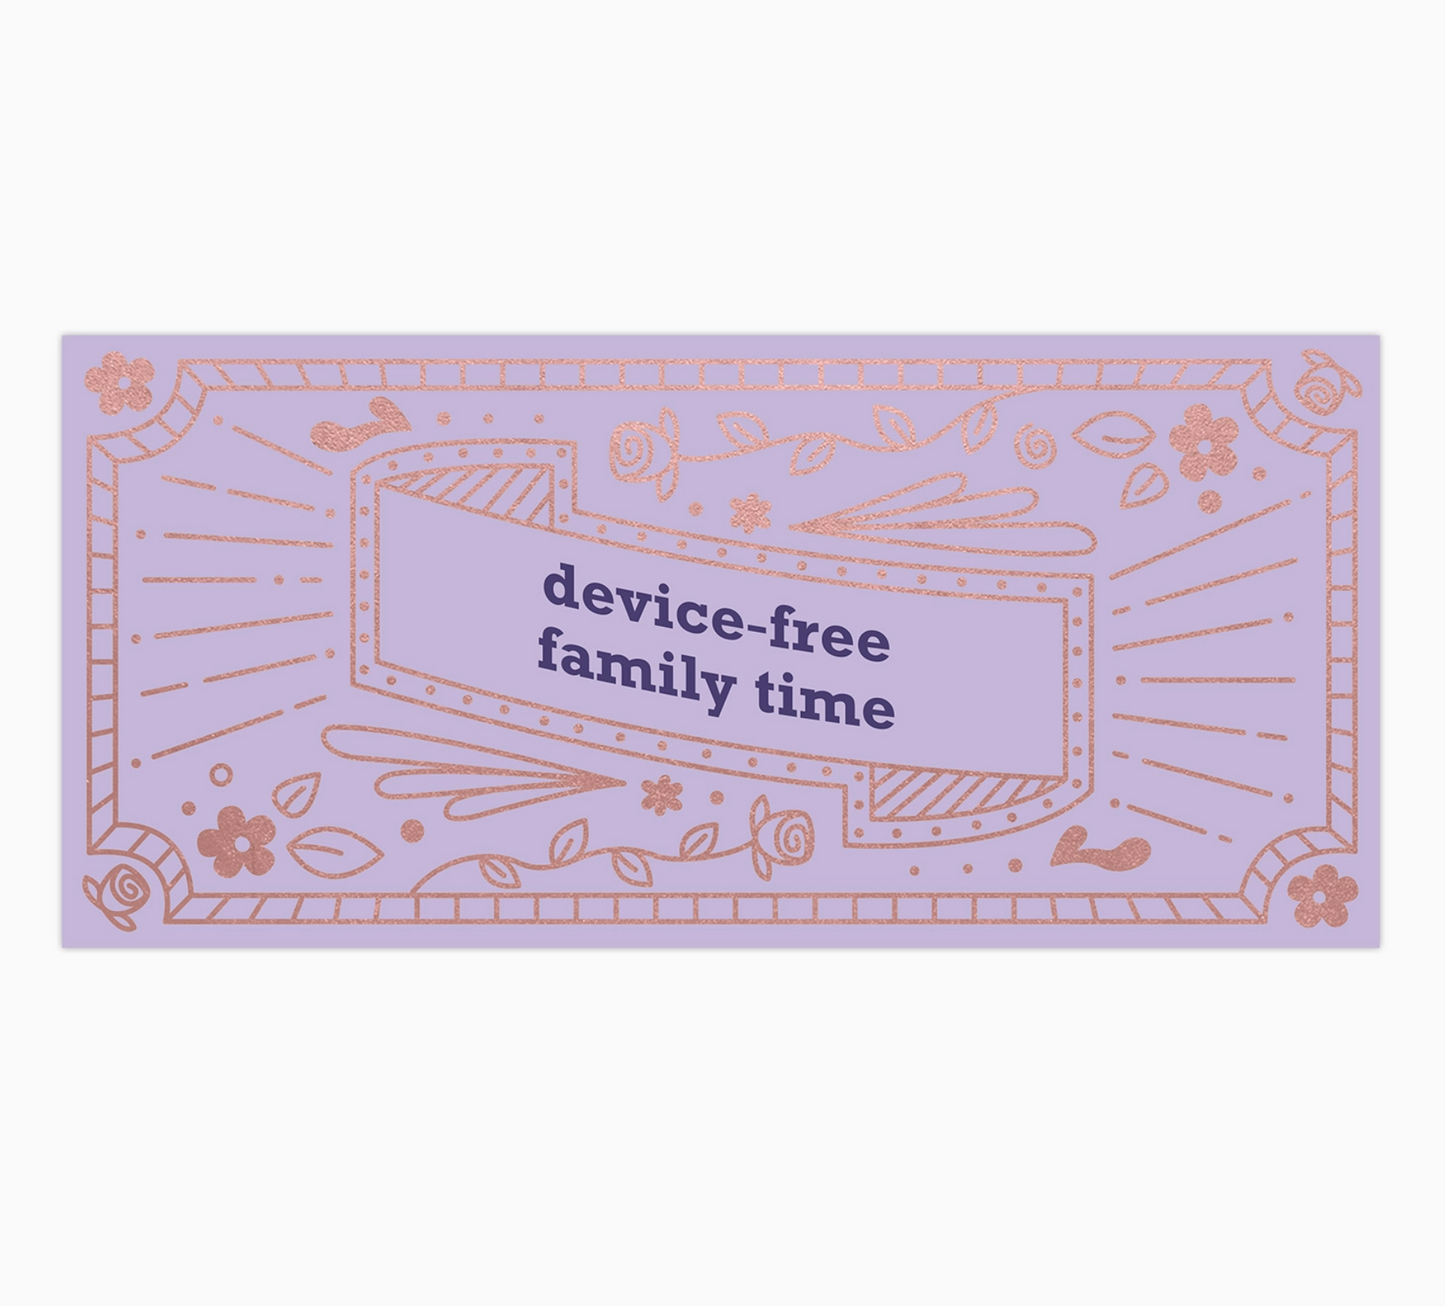 Fill in the Love® Mom Vouchers - 15 unique coupons